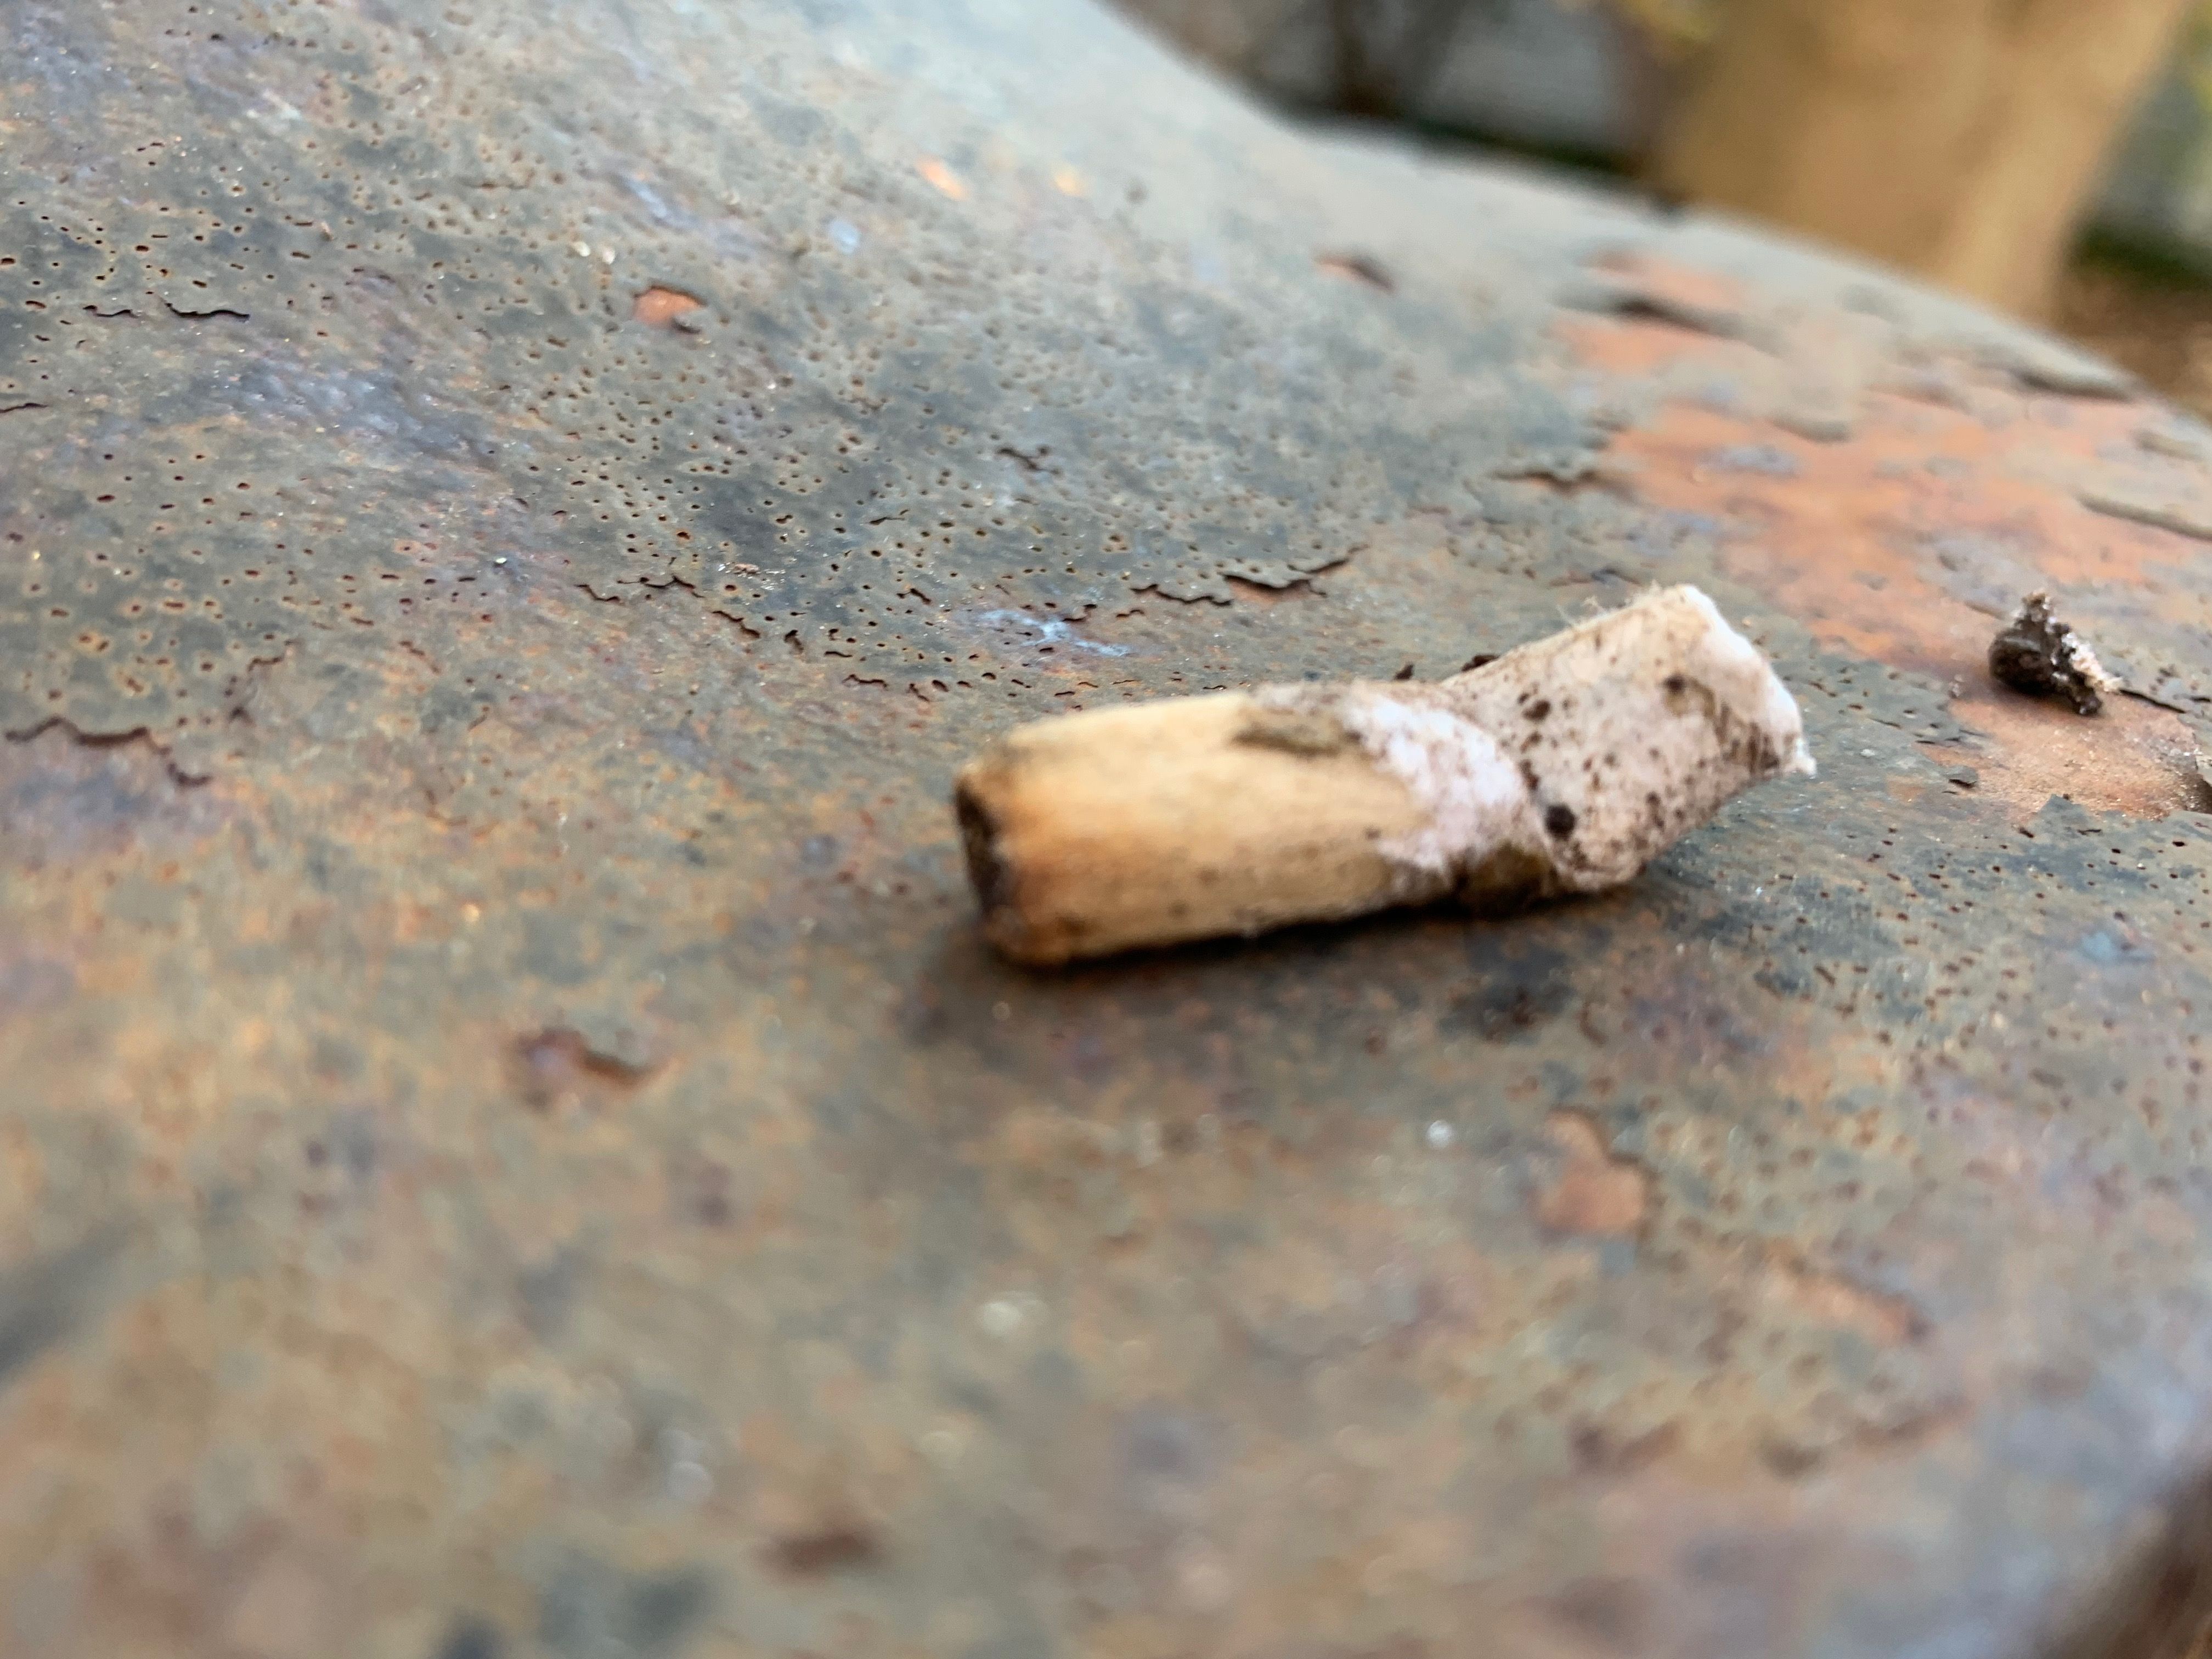 The remains of a cigarette laying on the edge of an outdoor ashtray. Photo credit by Gabrielle Cellucci